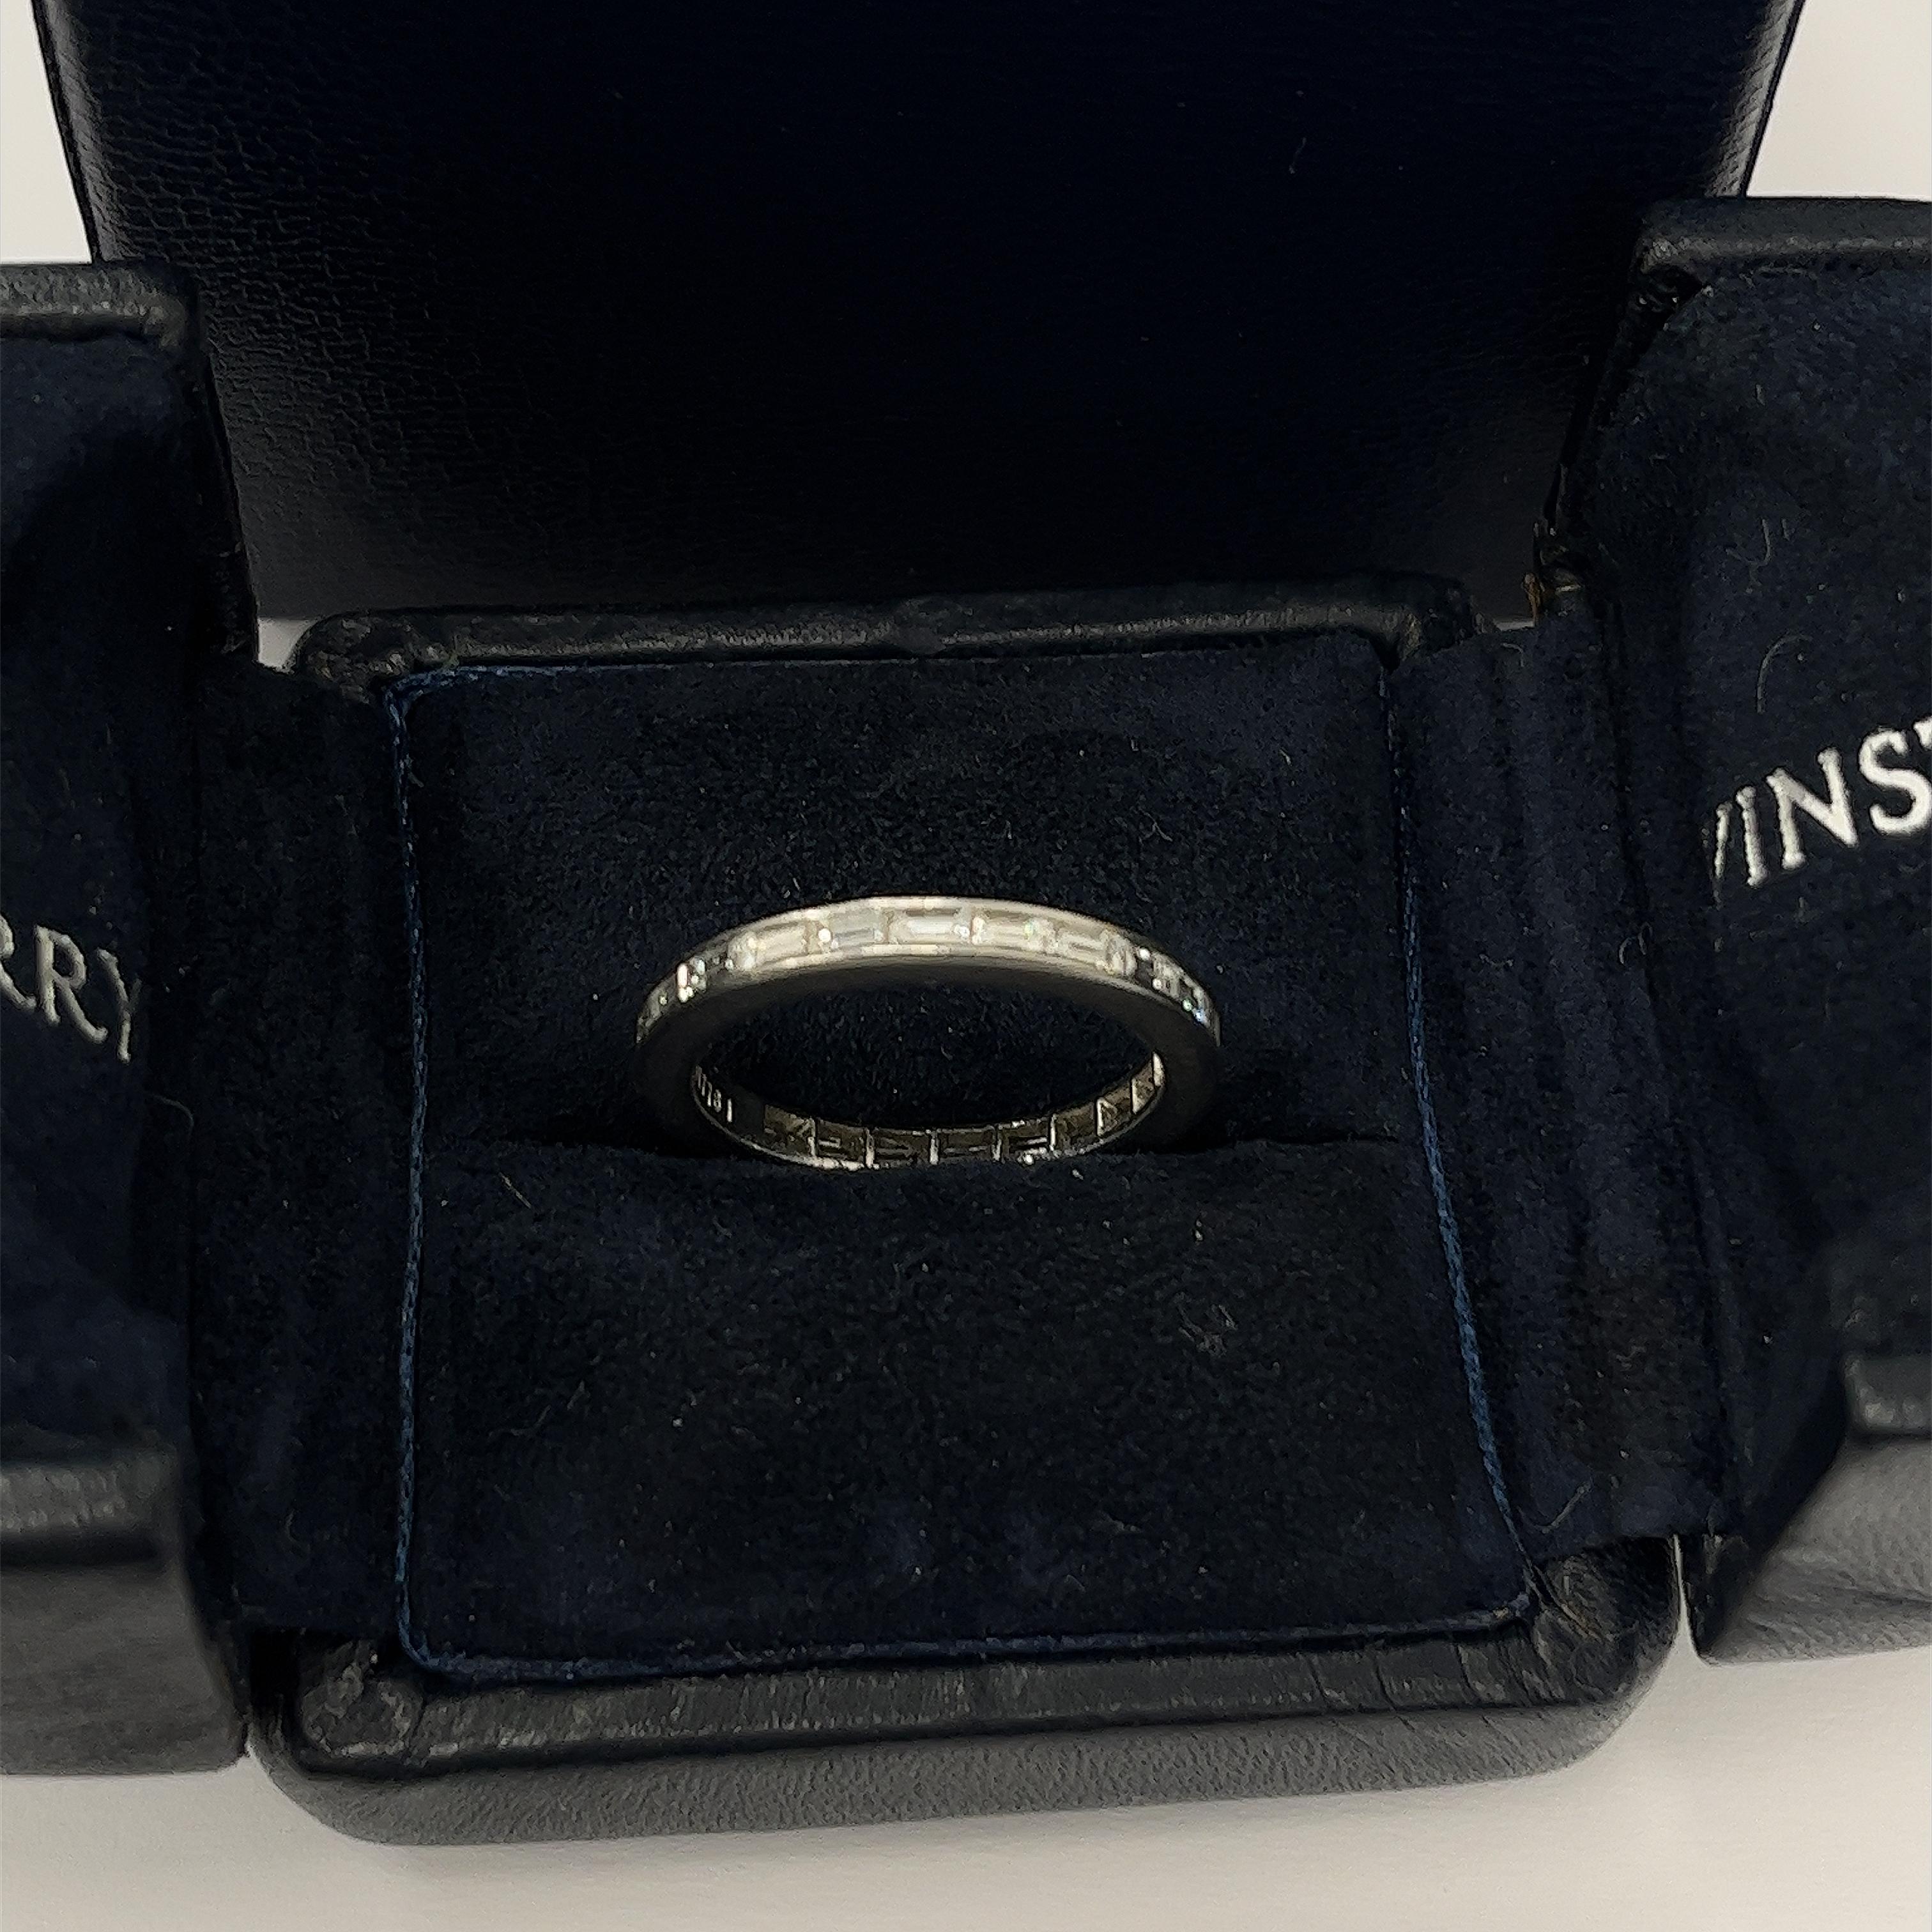 Harry Winston Diamond Wedding Band Set With Baguette Diamonds In Excellent Condition For Sale In London, GB